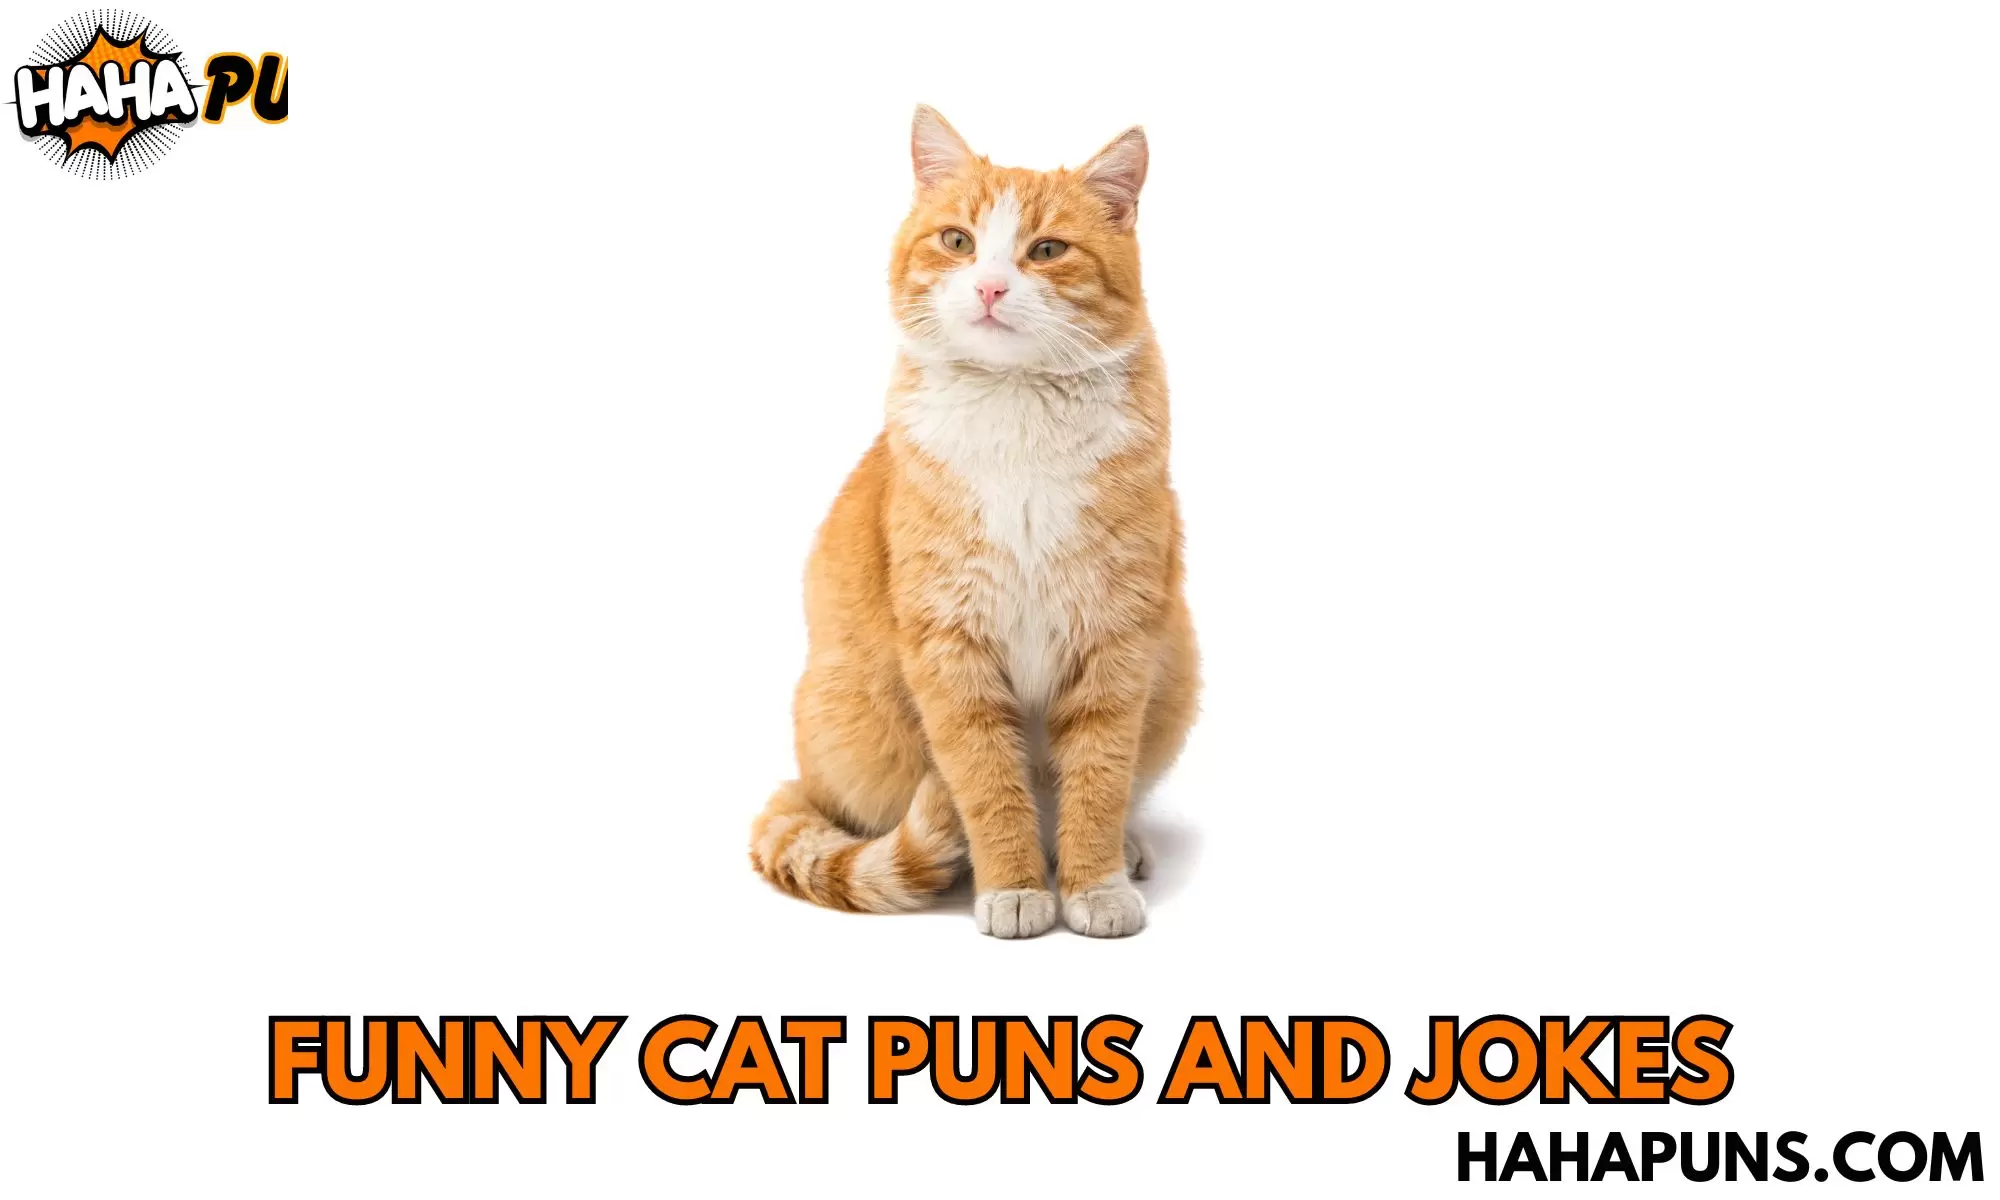 Funny Cat Puns and Jokes